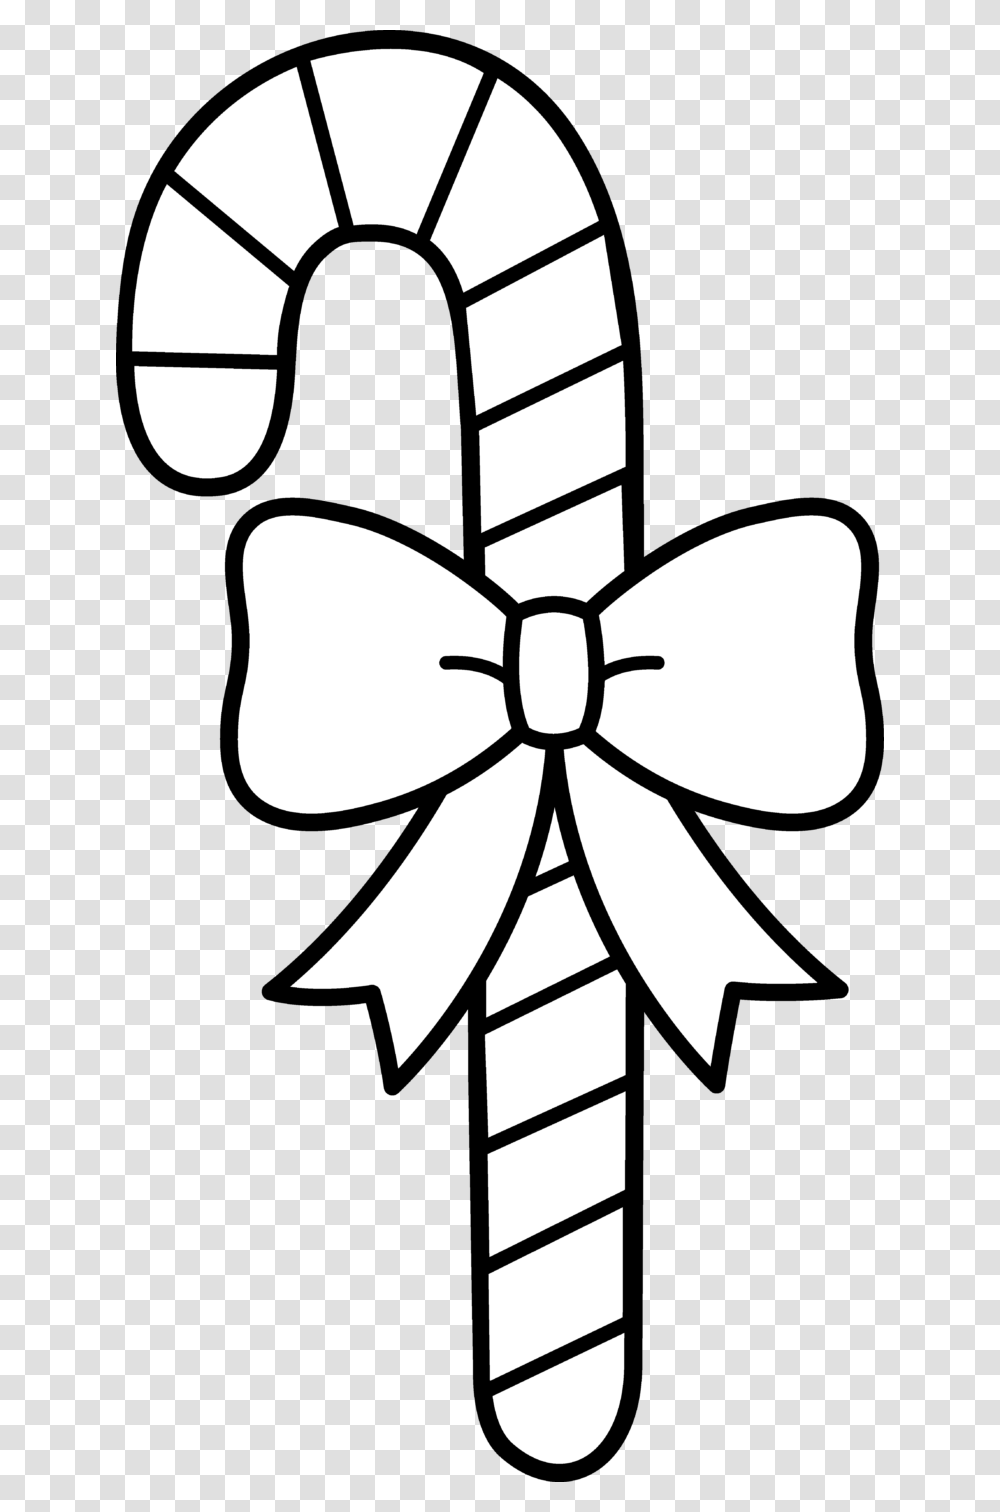 Candy Cane Coloring Page, Tie, Accessories, Accessory, Stencil Transparent Png